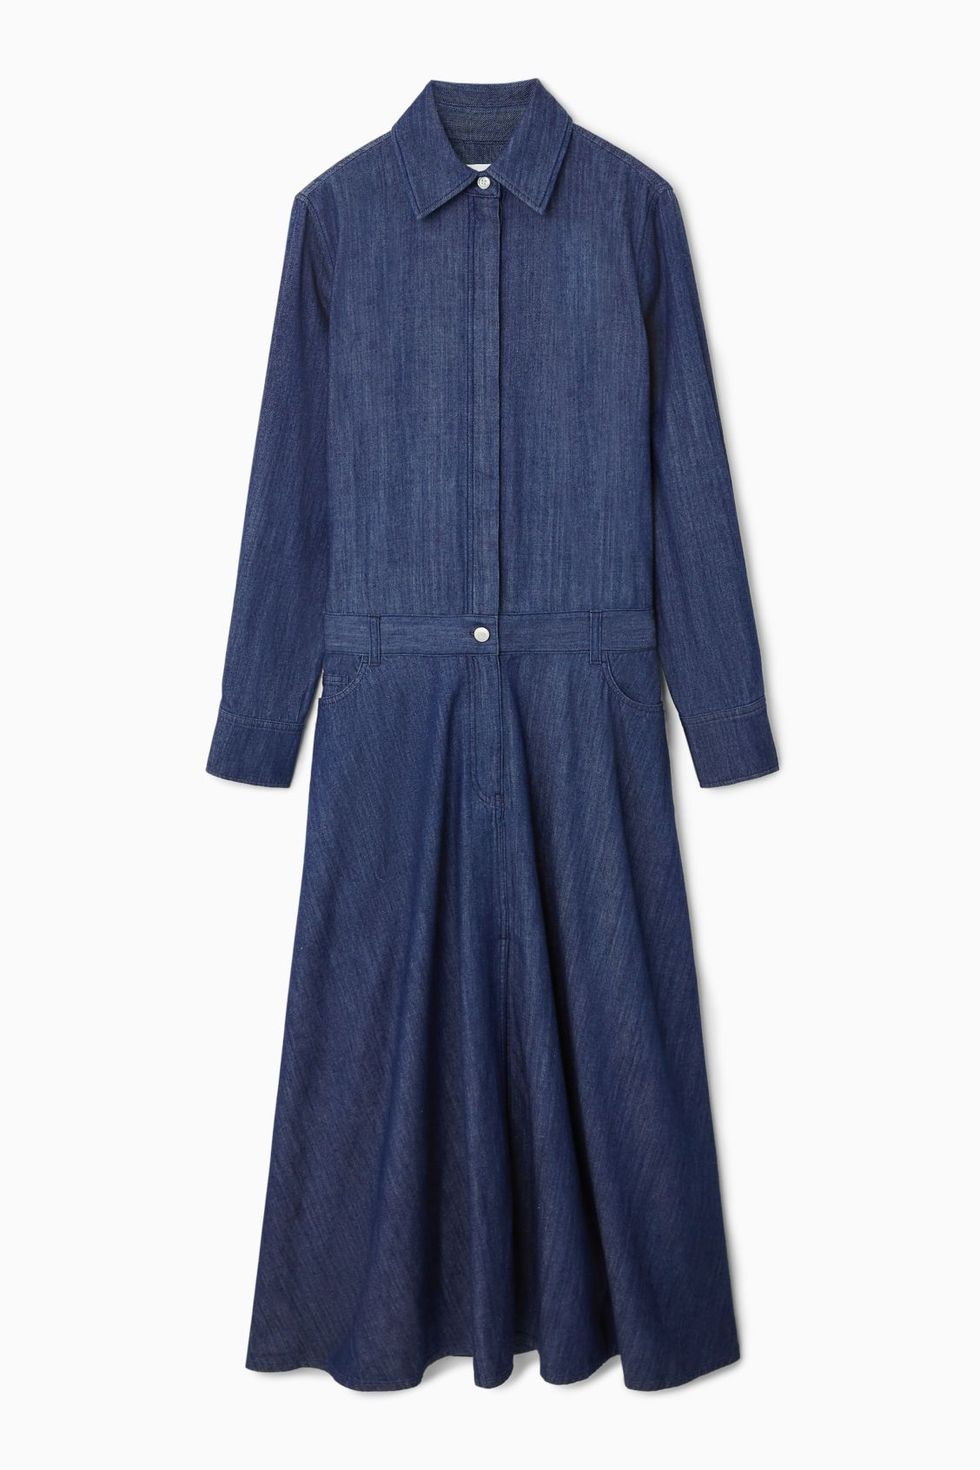 The best denim dresses to buy now and wear forever